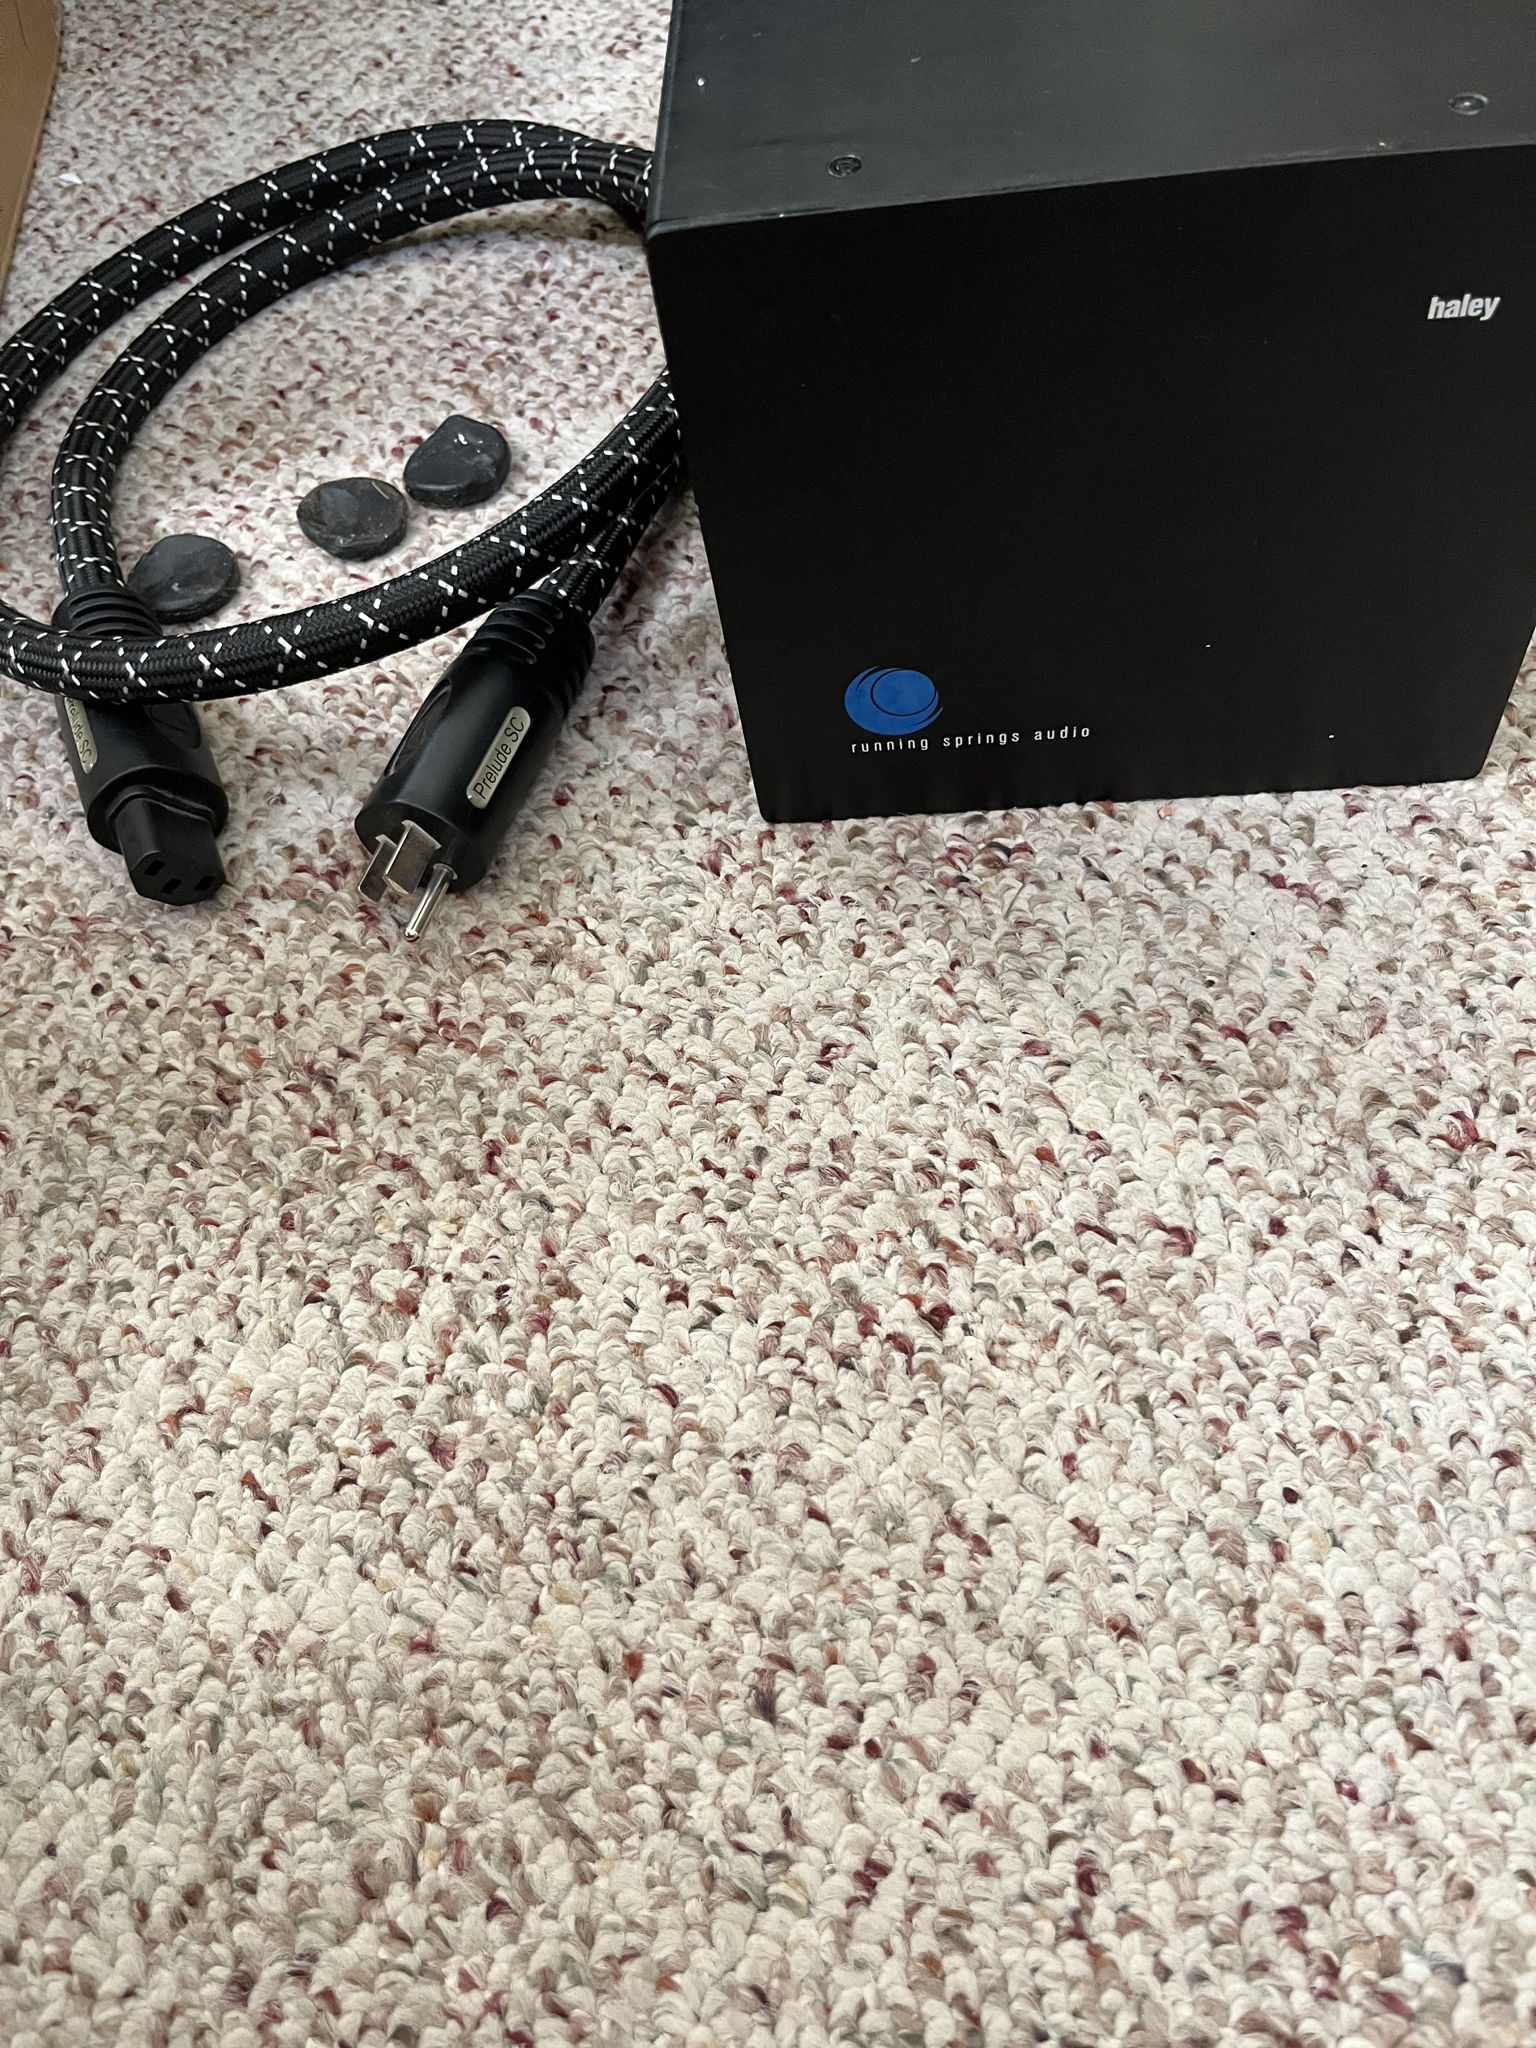 Running Springs Audio Haley power conditioner with free...